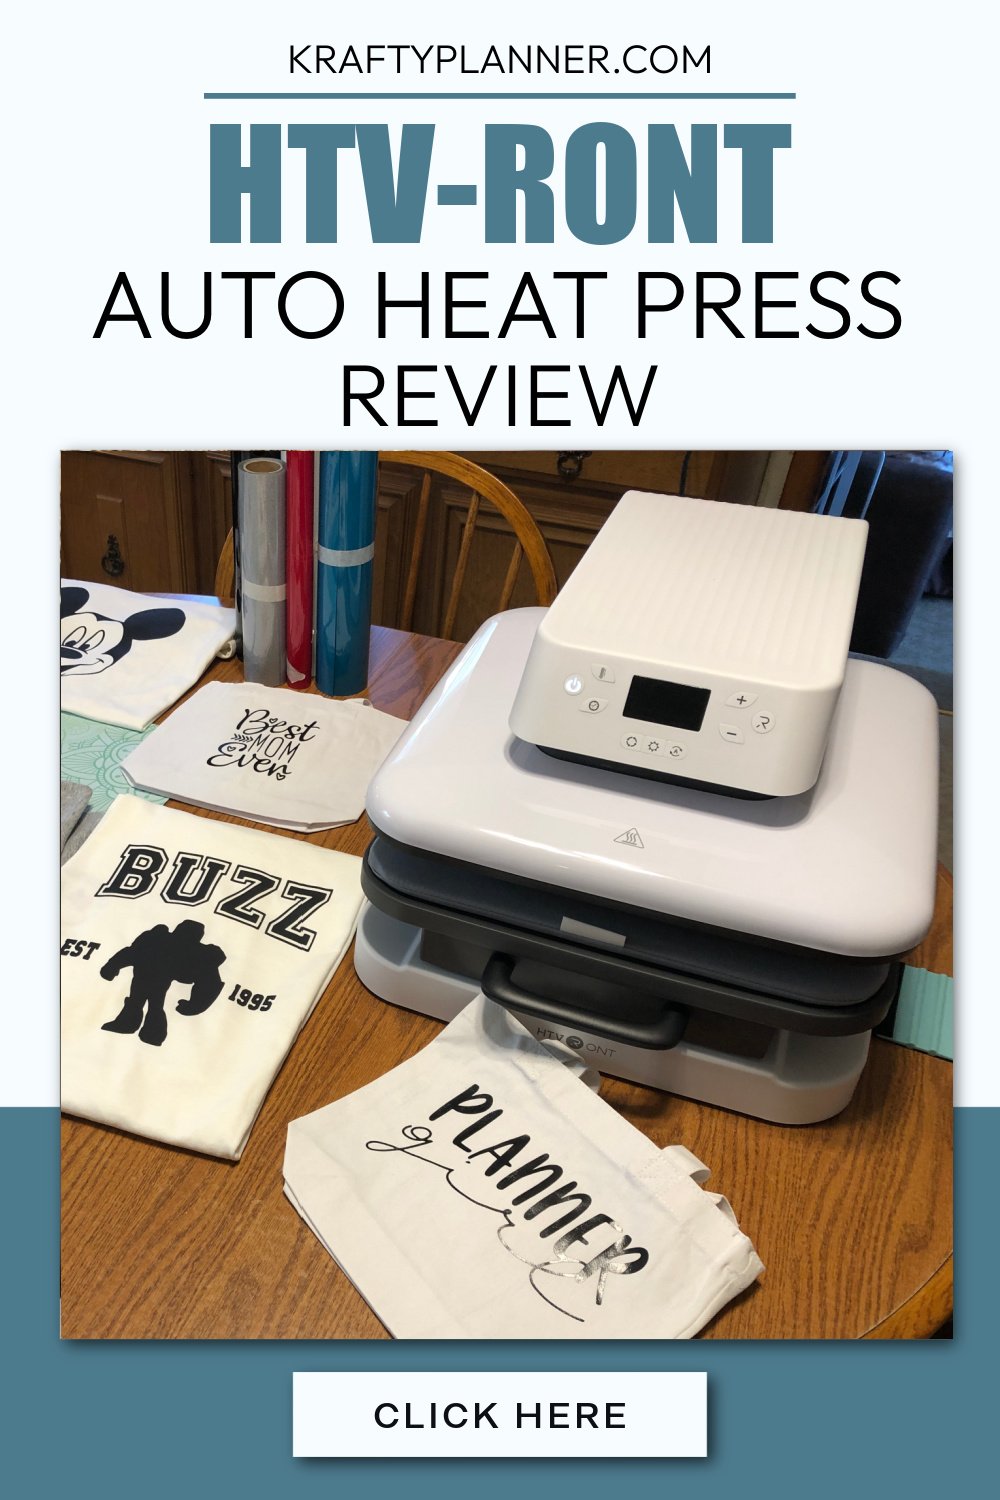 HTVRONT Automatic Heat Press Review  Best Heat Press Machine for DIY  Projects! 